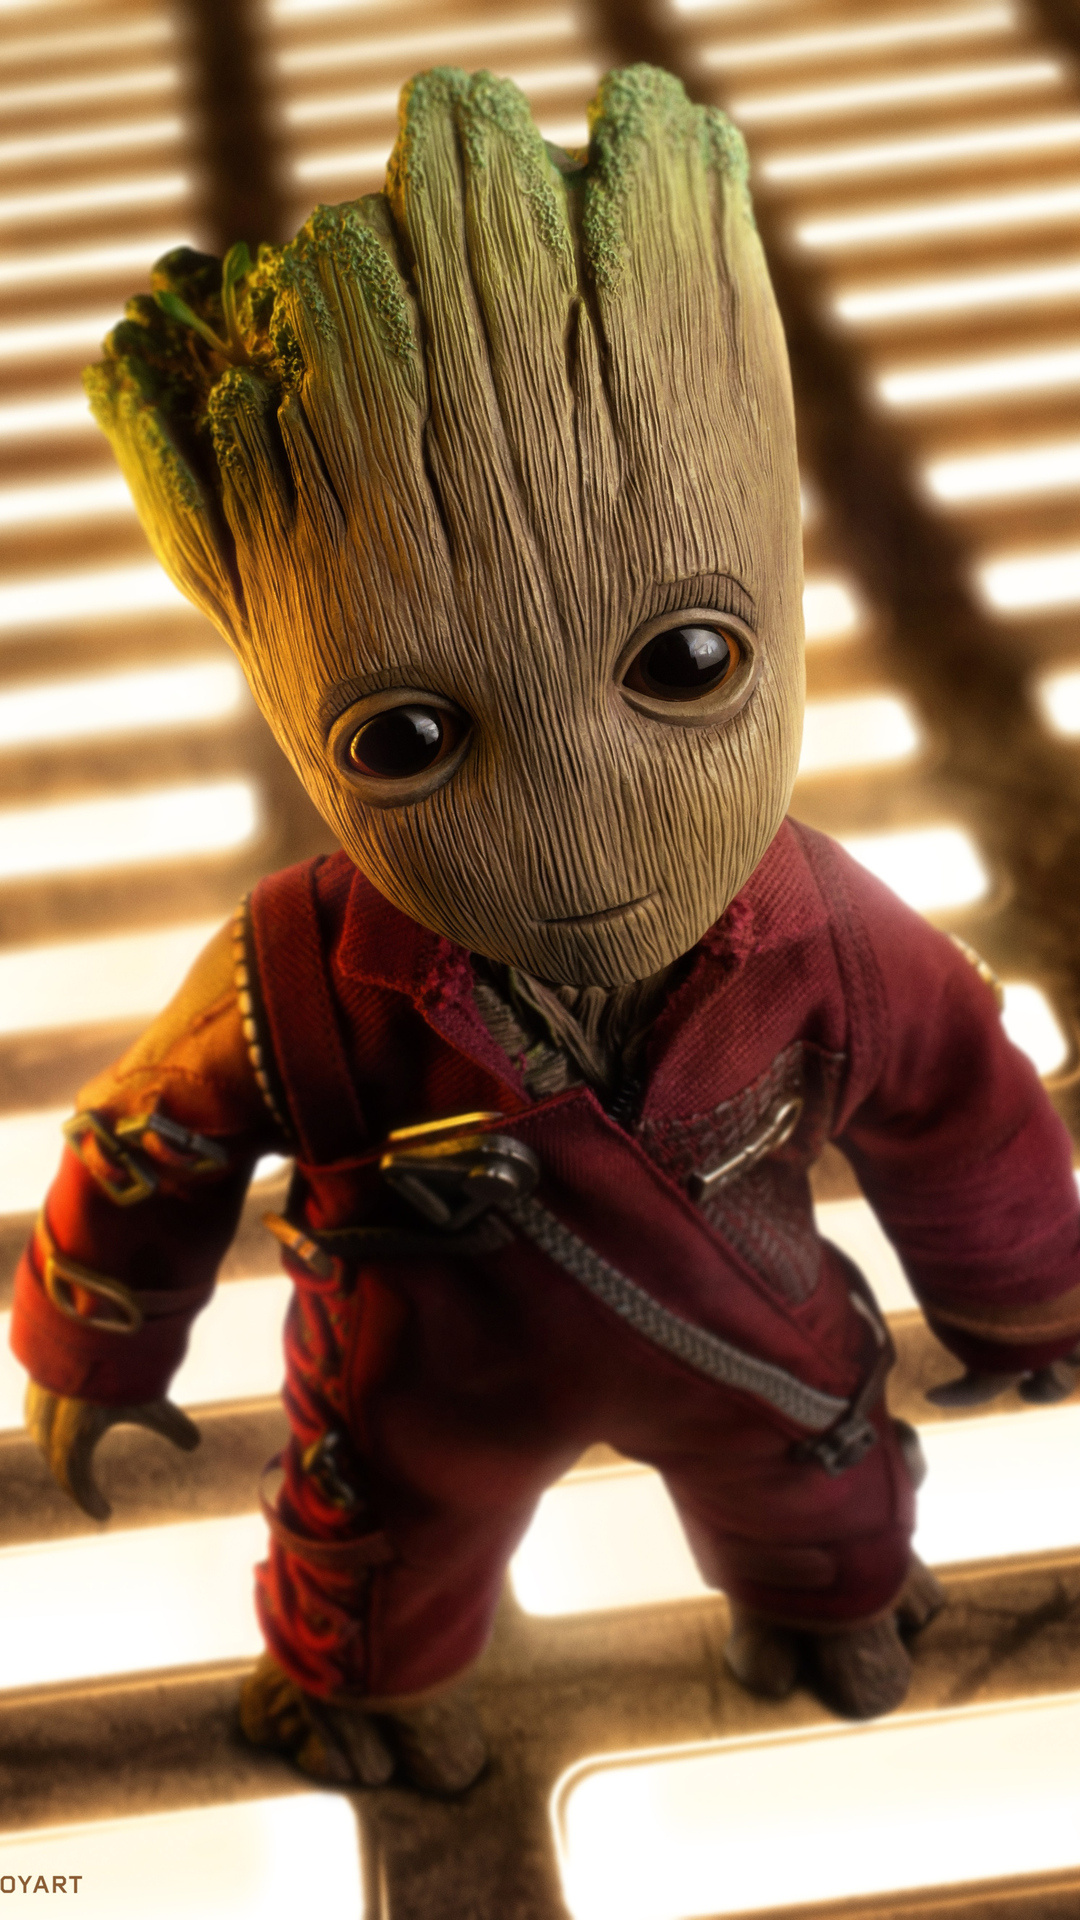 4K Baby Groot, Cute iPhone wallpapers, High-quality images, Marvel character, 1080x1920 Full HD Phone